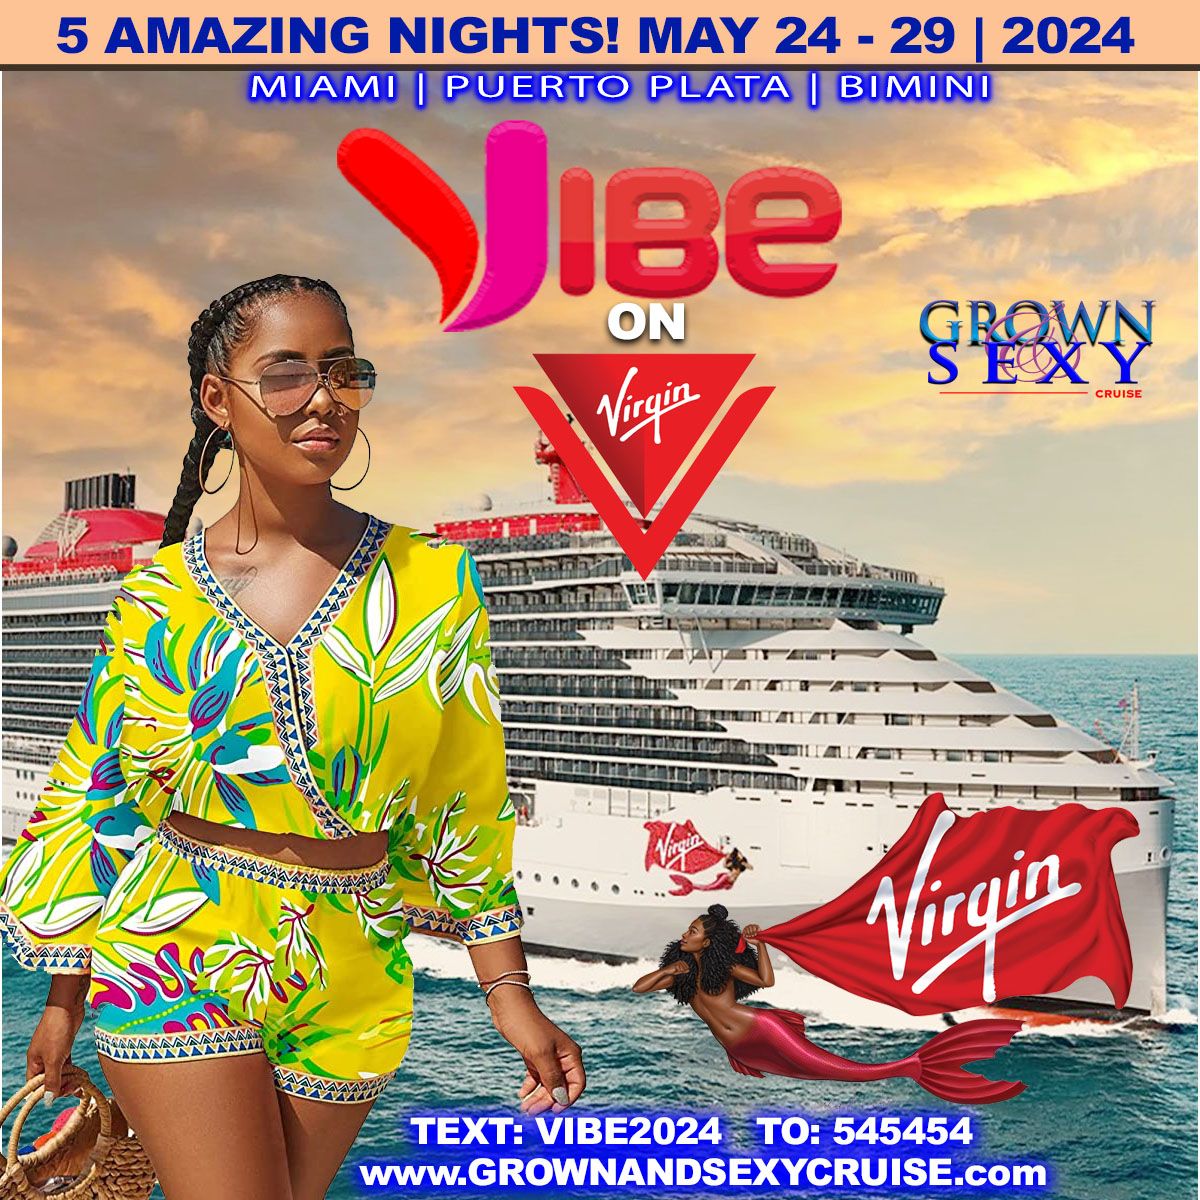 THE GROWN & SEXY "VIBE ON VIRGIN"  CRUISE 2024